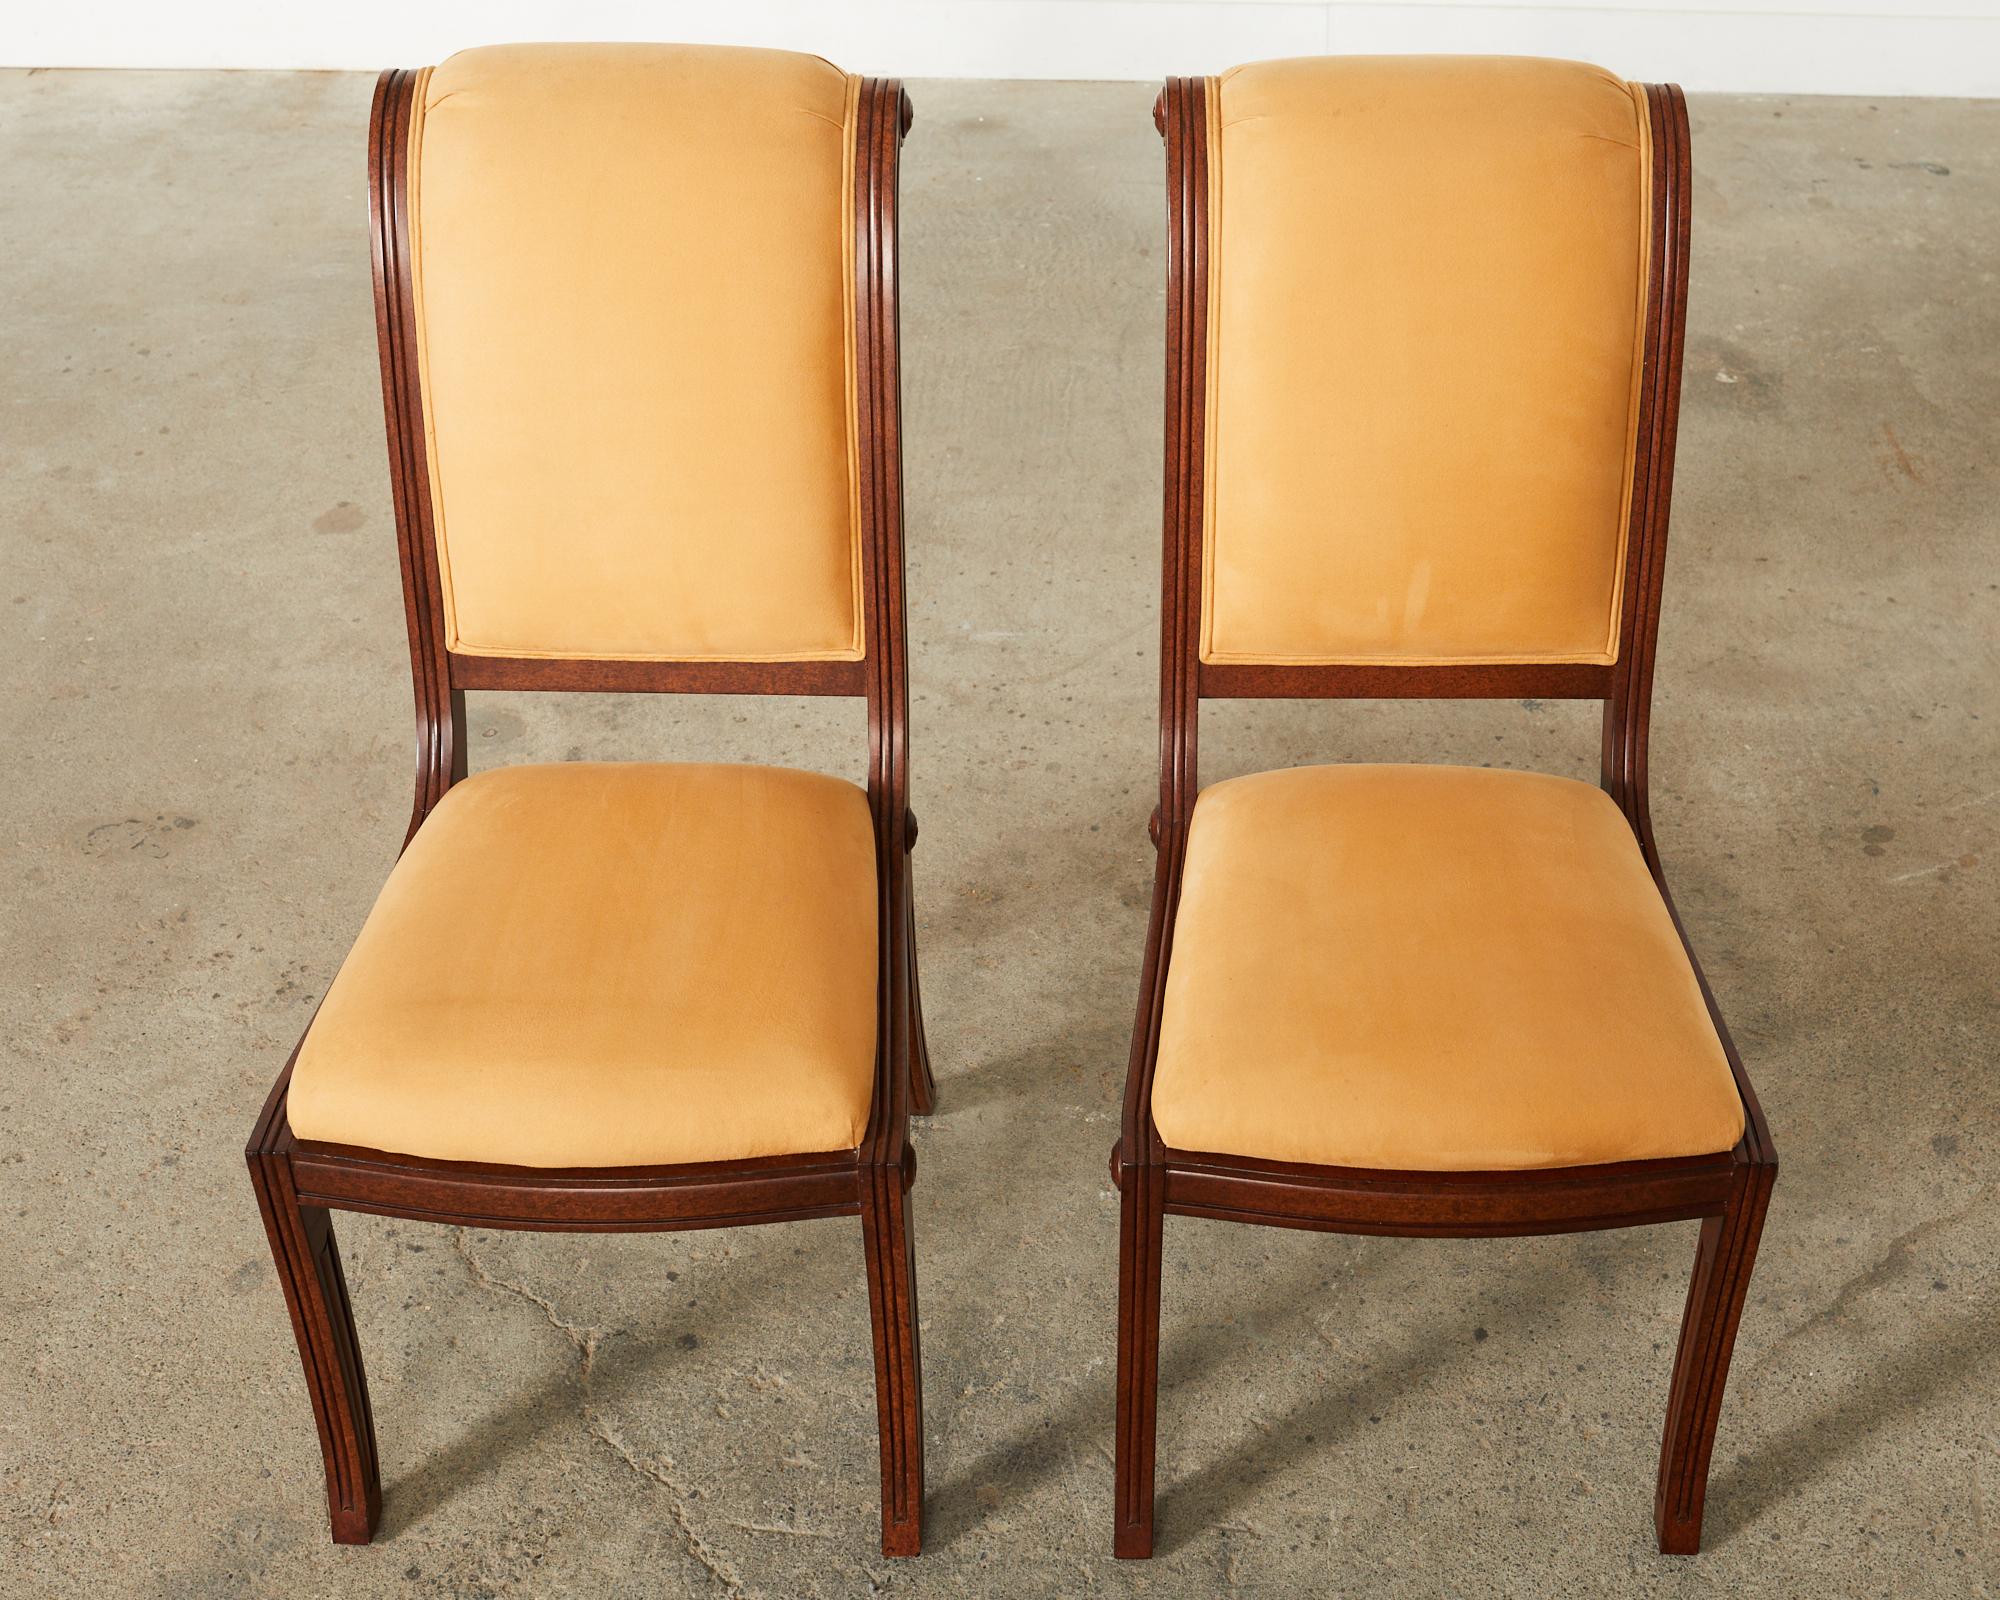 Set of Twelve Regency Style Dining Chairs by Lily Jack 1